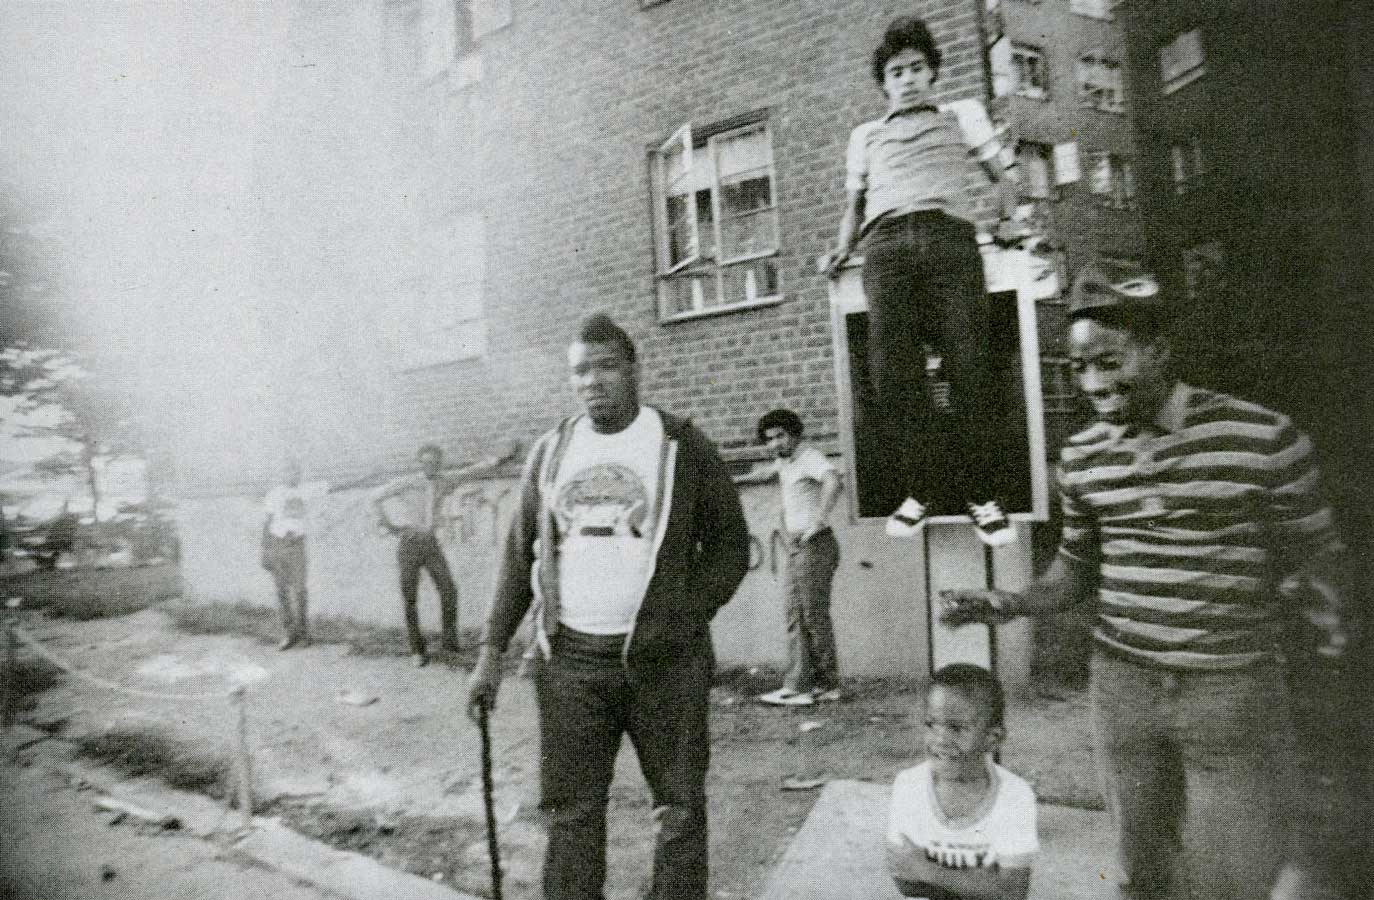 Afrika Bambaataa at Bronx River Project (1982) from Steven Hager, Hip Hop: the Illustrated